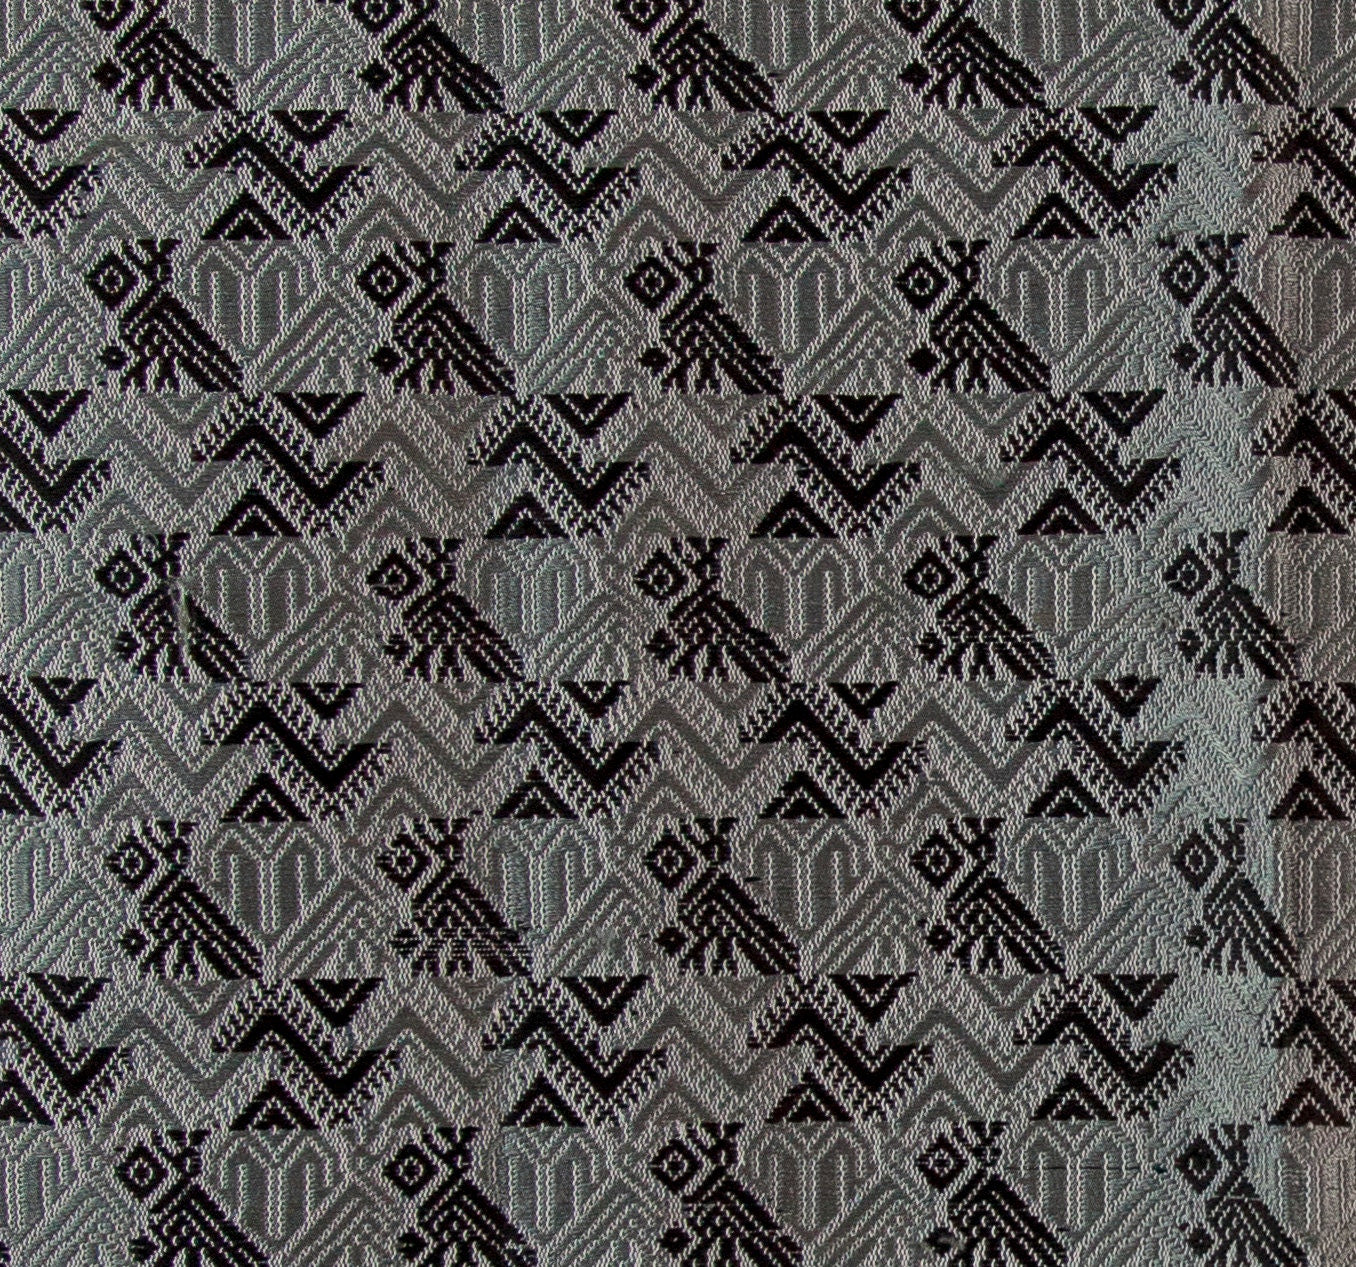 Rare fabric, grey/black, 100x120cm unique from Guatemala, handwoven by Mayan women, sewing projects such as pillows, vests, bags